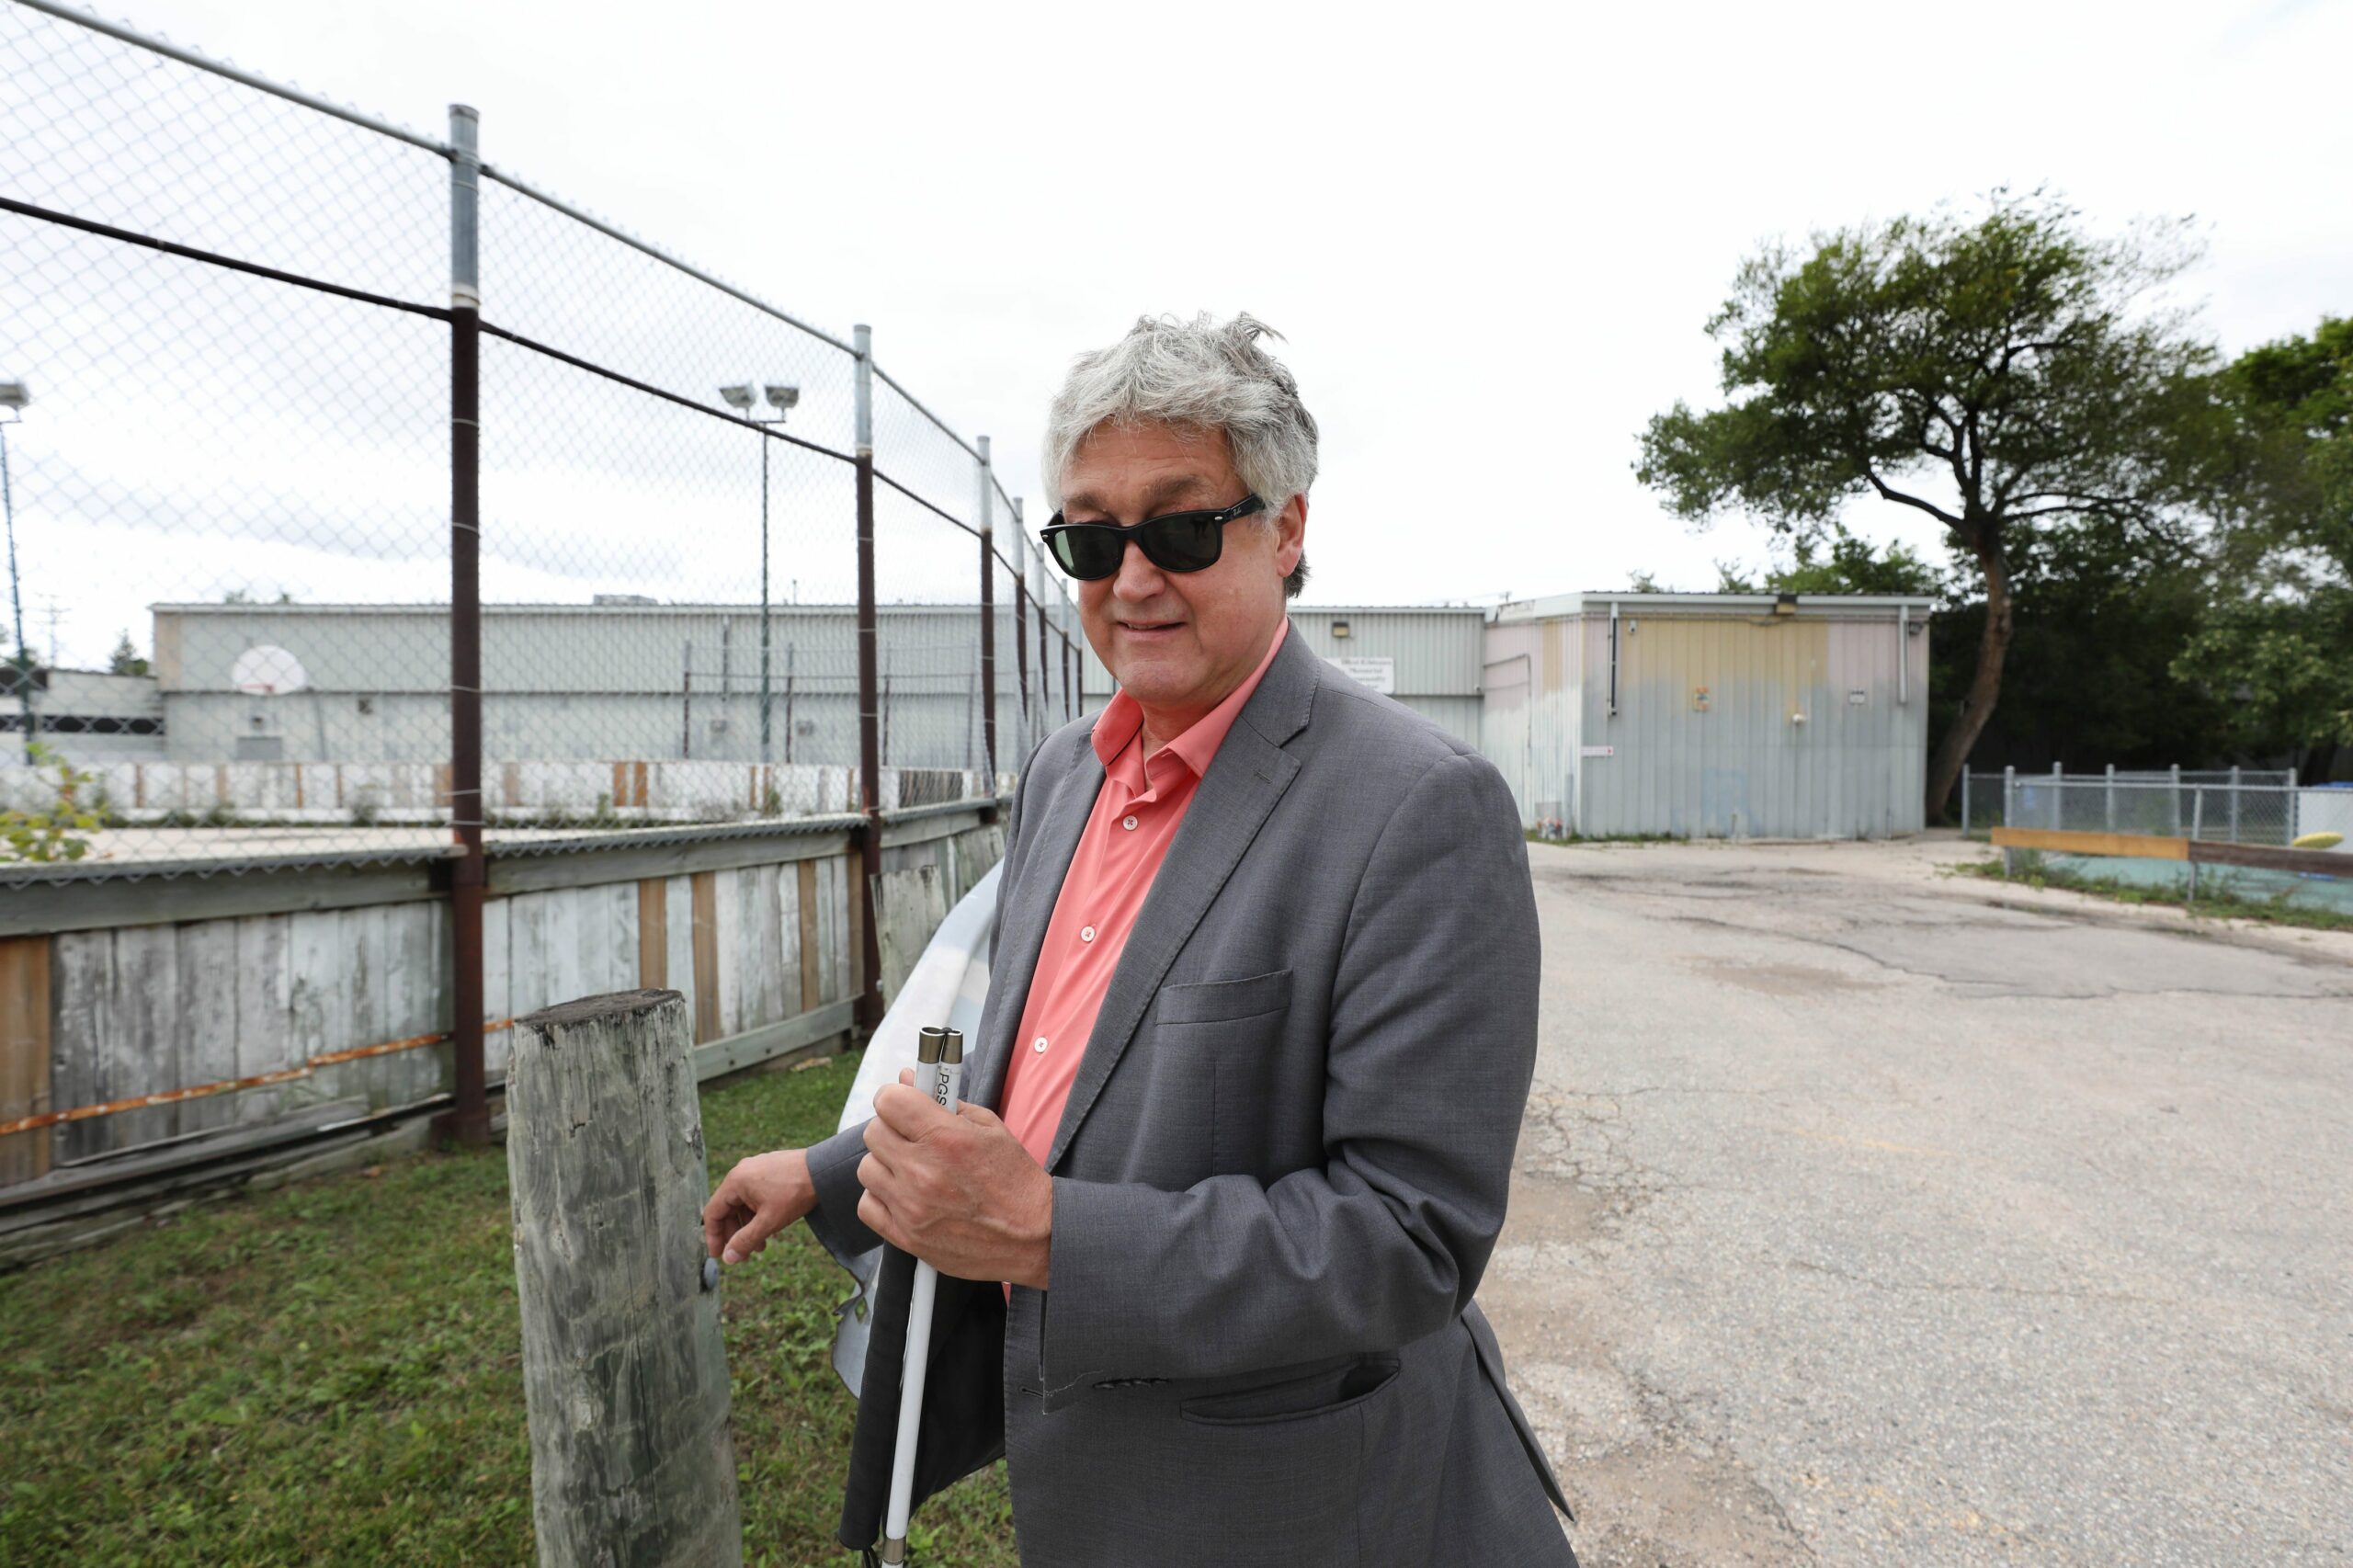 Ross Eadie, city councillor, stands outside the West Kildonan community centre wearing a grey jacket, salmon shirt and dark glasses. Behind him a high chain link fence encloses an outdoor arena